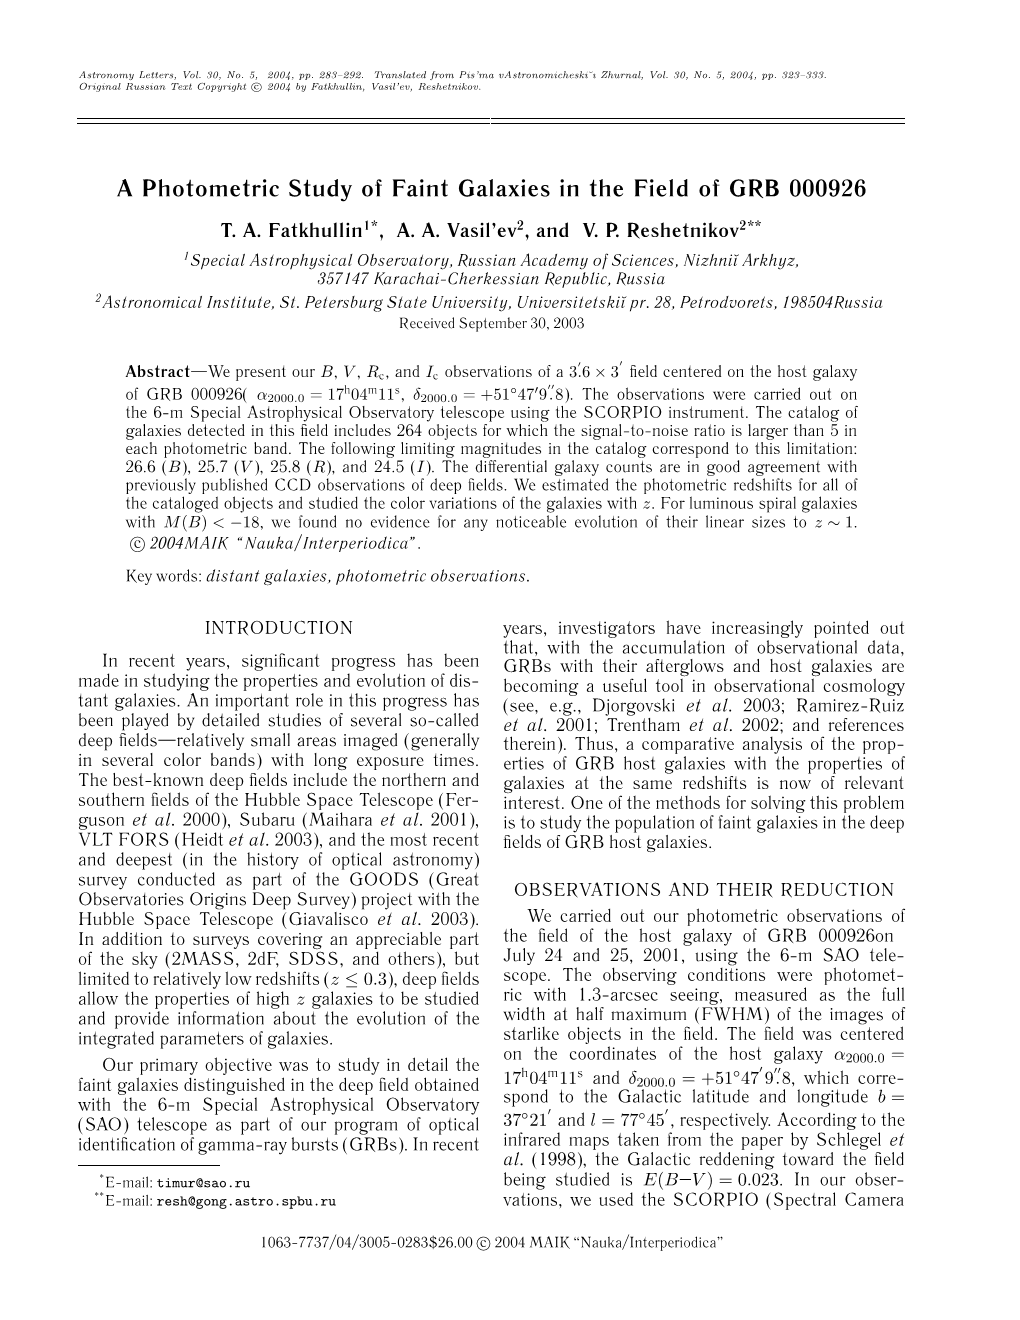 A Photometric Study of Faint Galaxies in the Field of GRB 000926 T